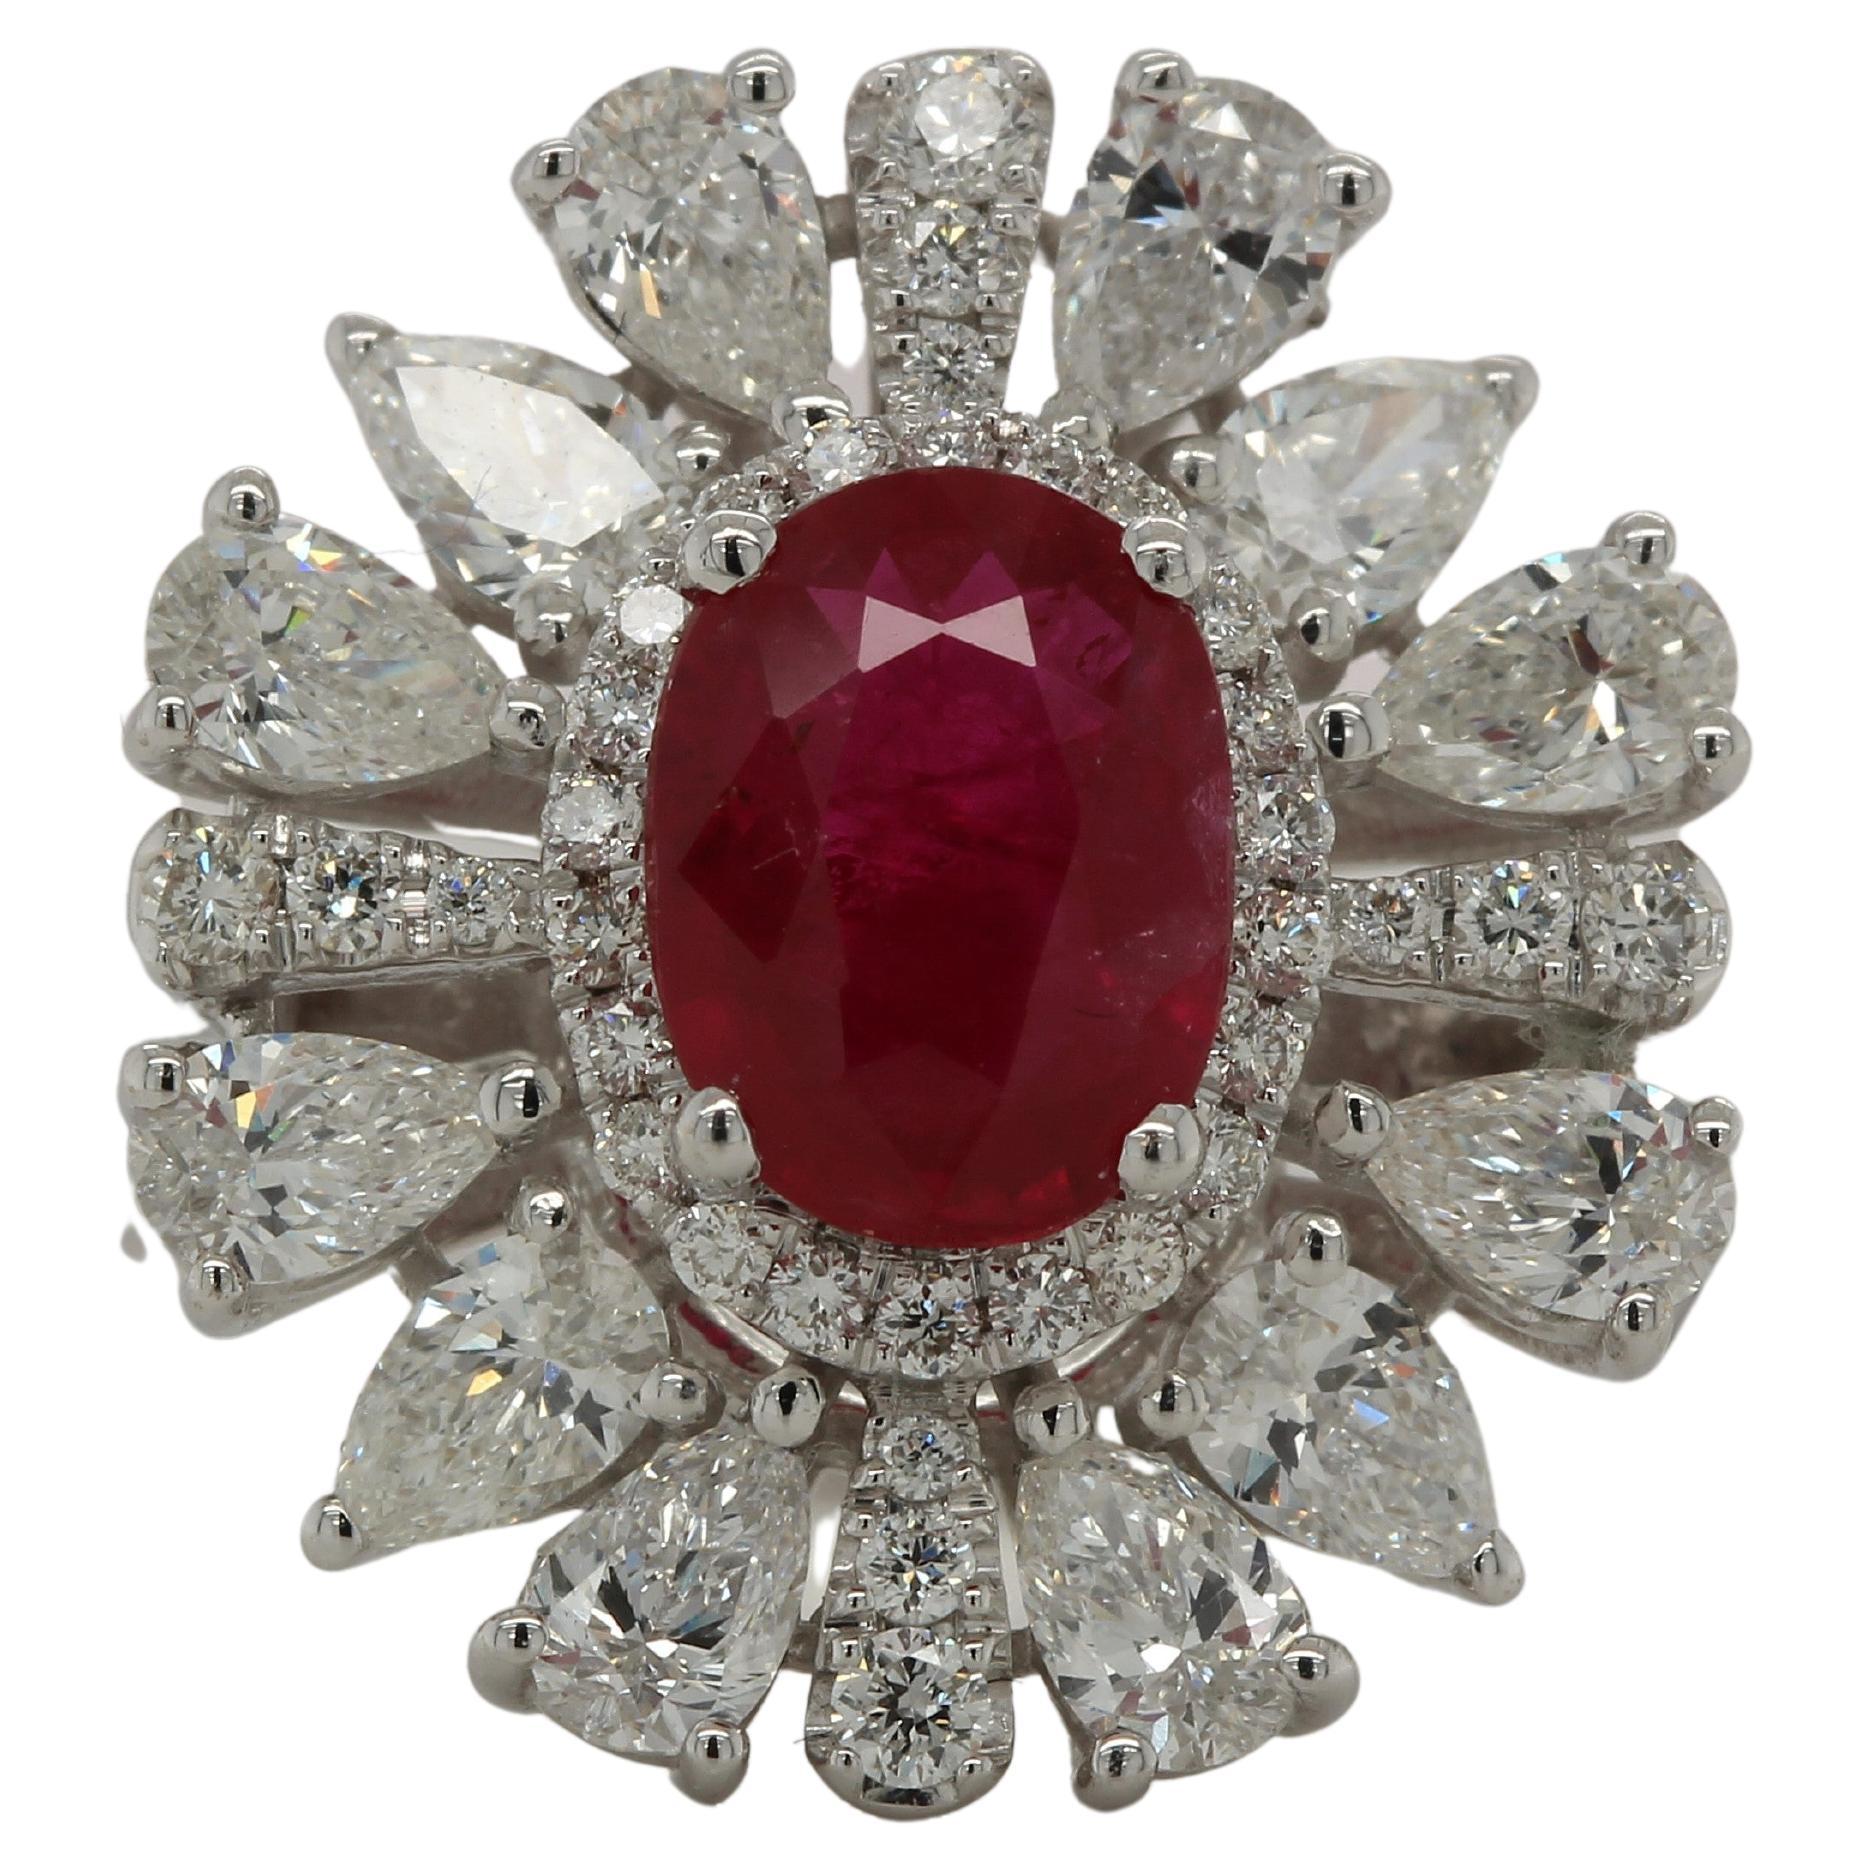 Our 1.49 carat oval ruby ring is a stunning masterpiece of elegance and simplicity. It showcases a single oval cut natural untreated ruby of the finest quality, set with 0.21 carats of white round diamonds and white pears 1.31 carats. This exclusive